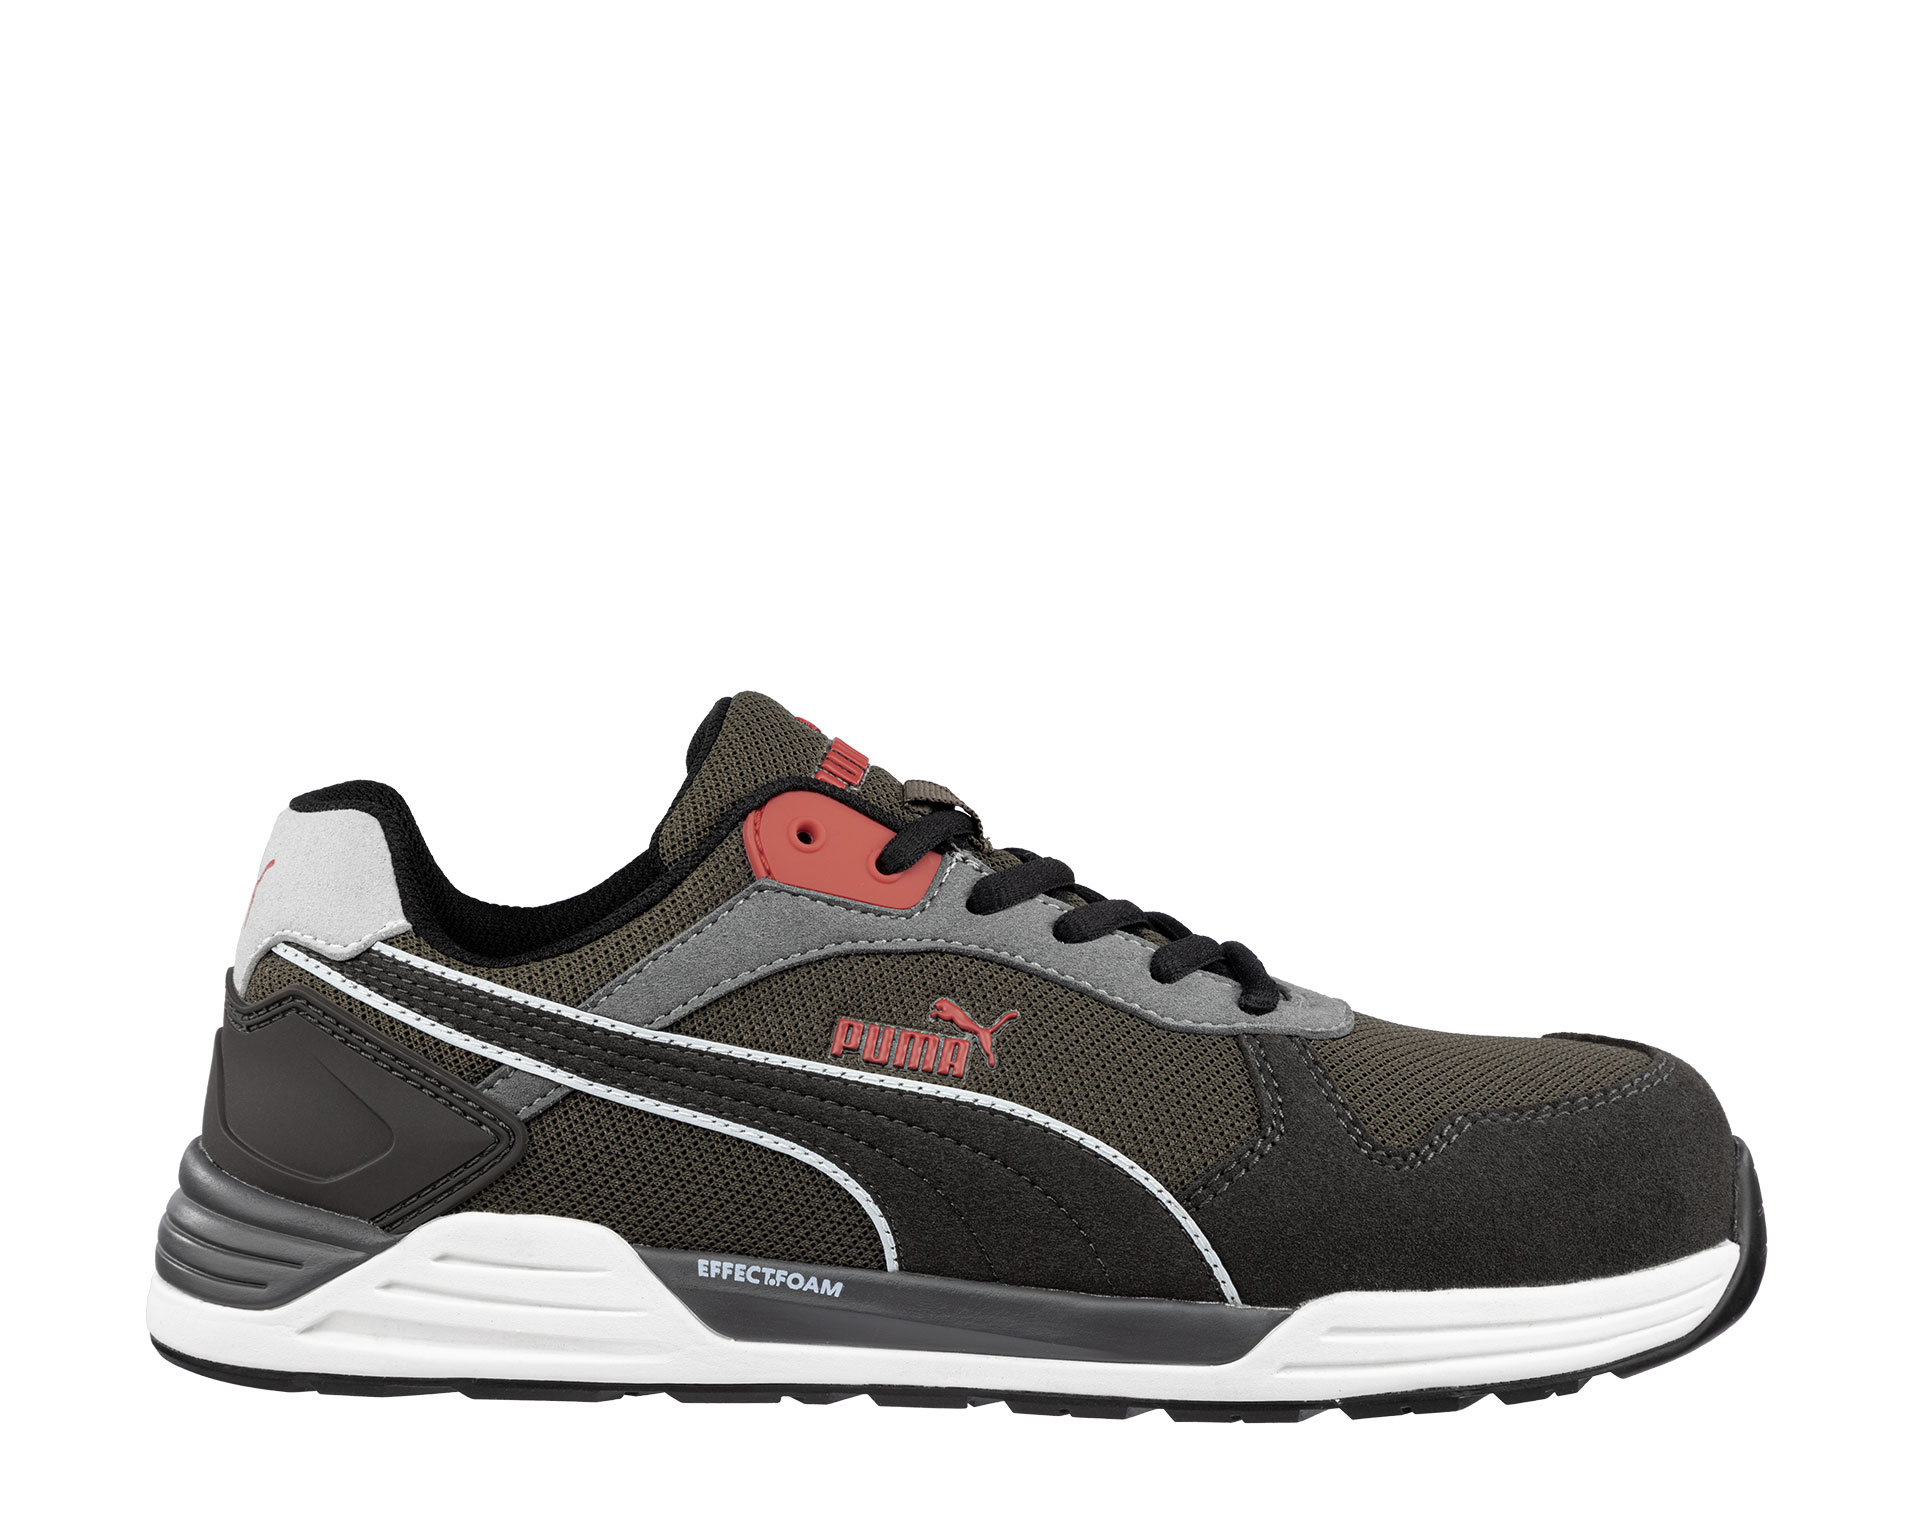 SAFETY shoes Puma LOW|PUMA S1P safety | FRONTSIDE English IVY ESD Safety